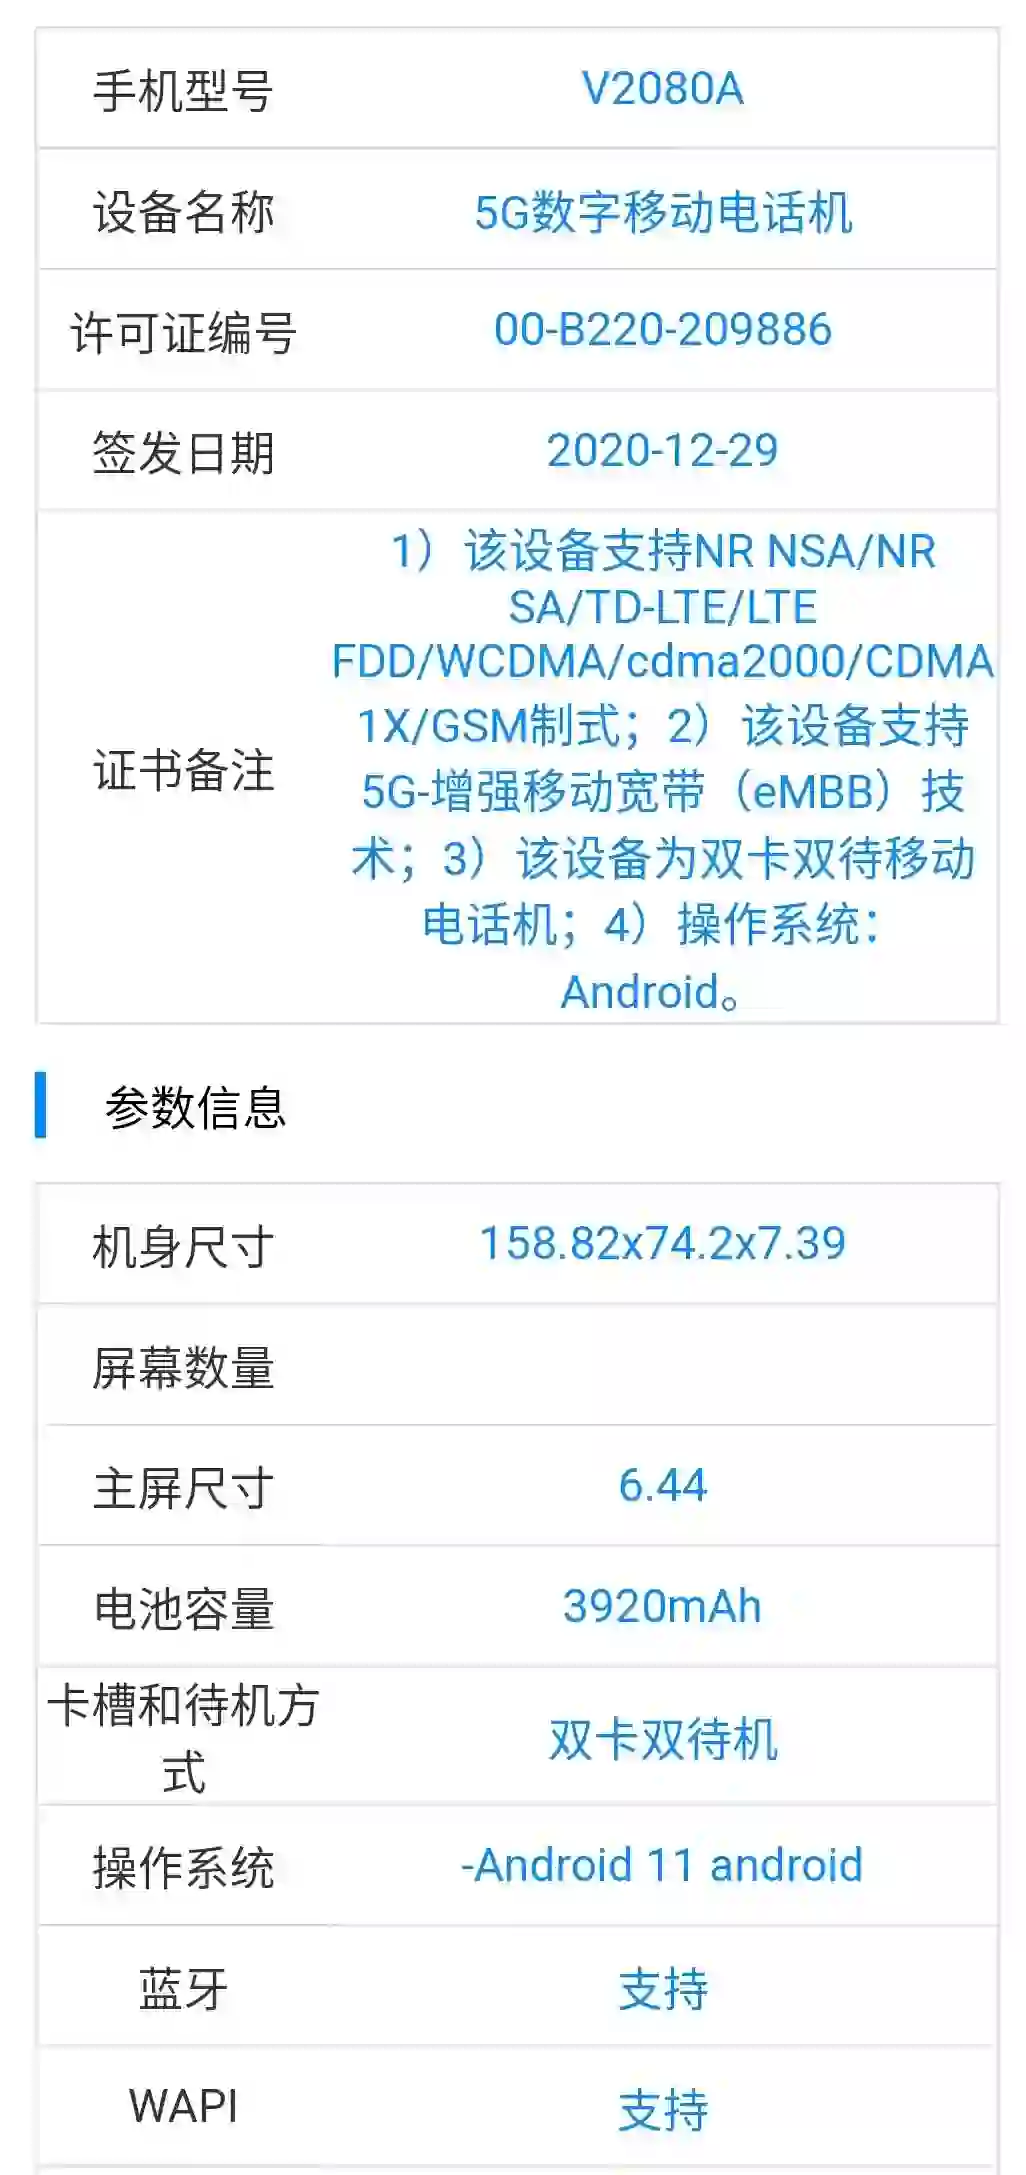 Vivo V2080A 5G spotted on Geekbench and TENAA with MediaTek Dimensity 820